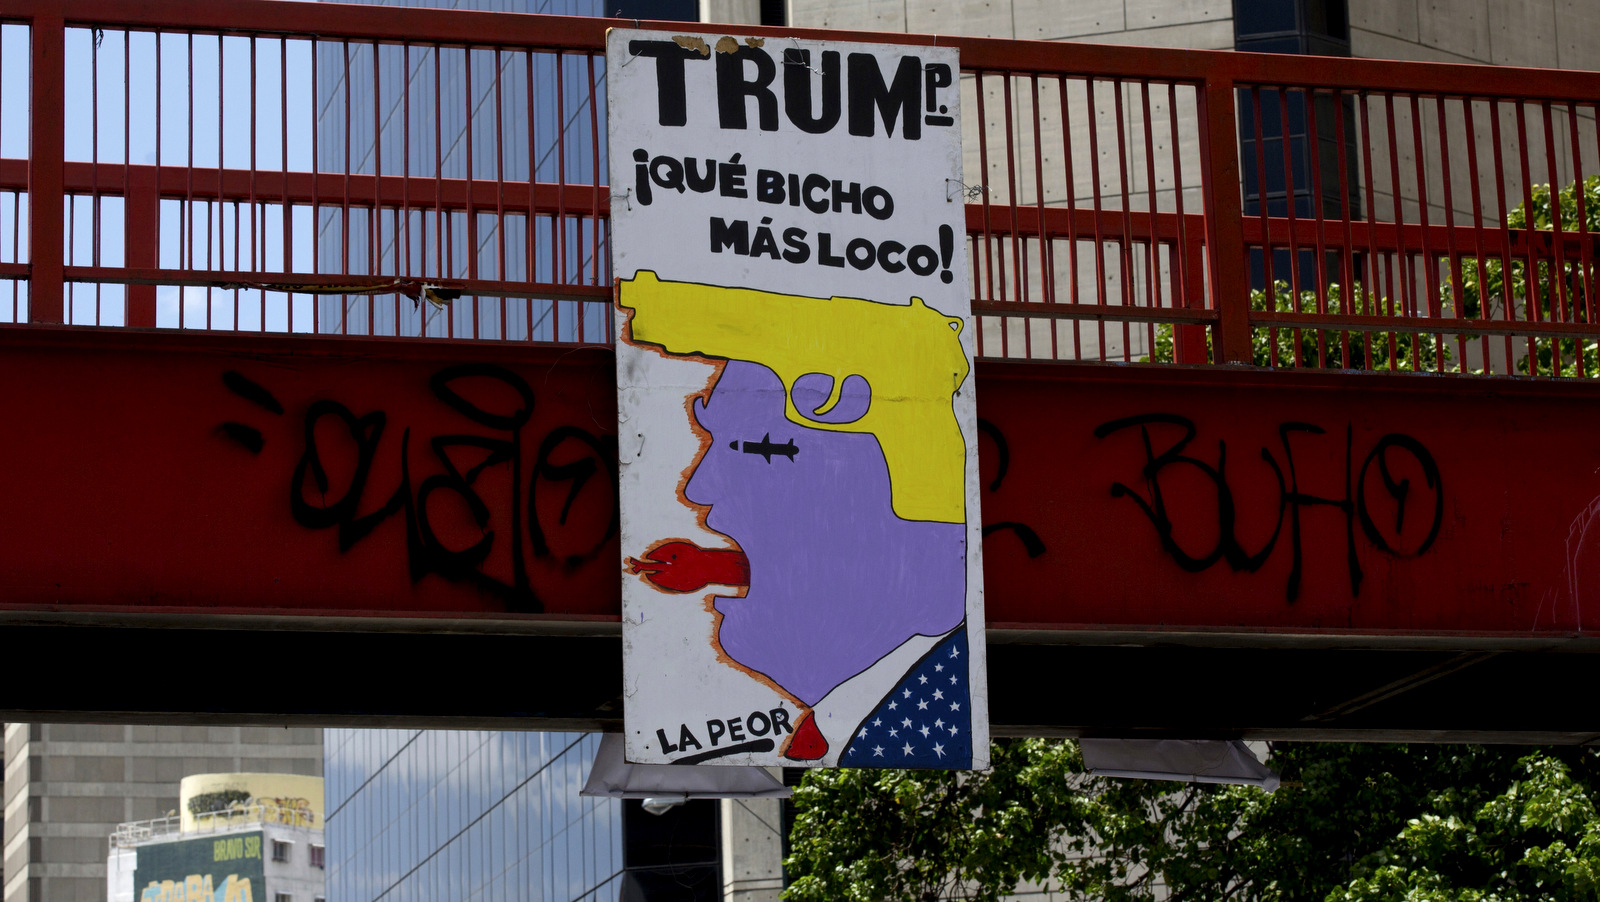 A sign with an image representing U.S. President Donald Trump and a text that reads in Spanish "Trump, what a crazy critter!" hangs from a bridge in Caracas, Venezuela, March 8, 2018. Fernando Llano | AP